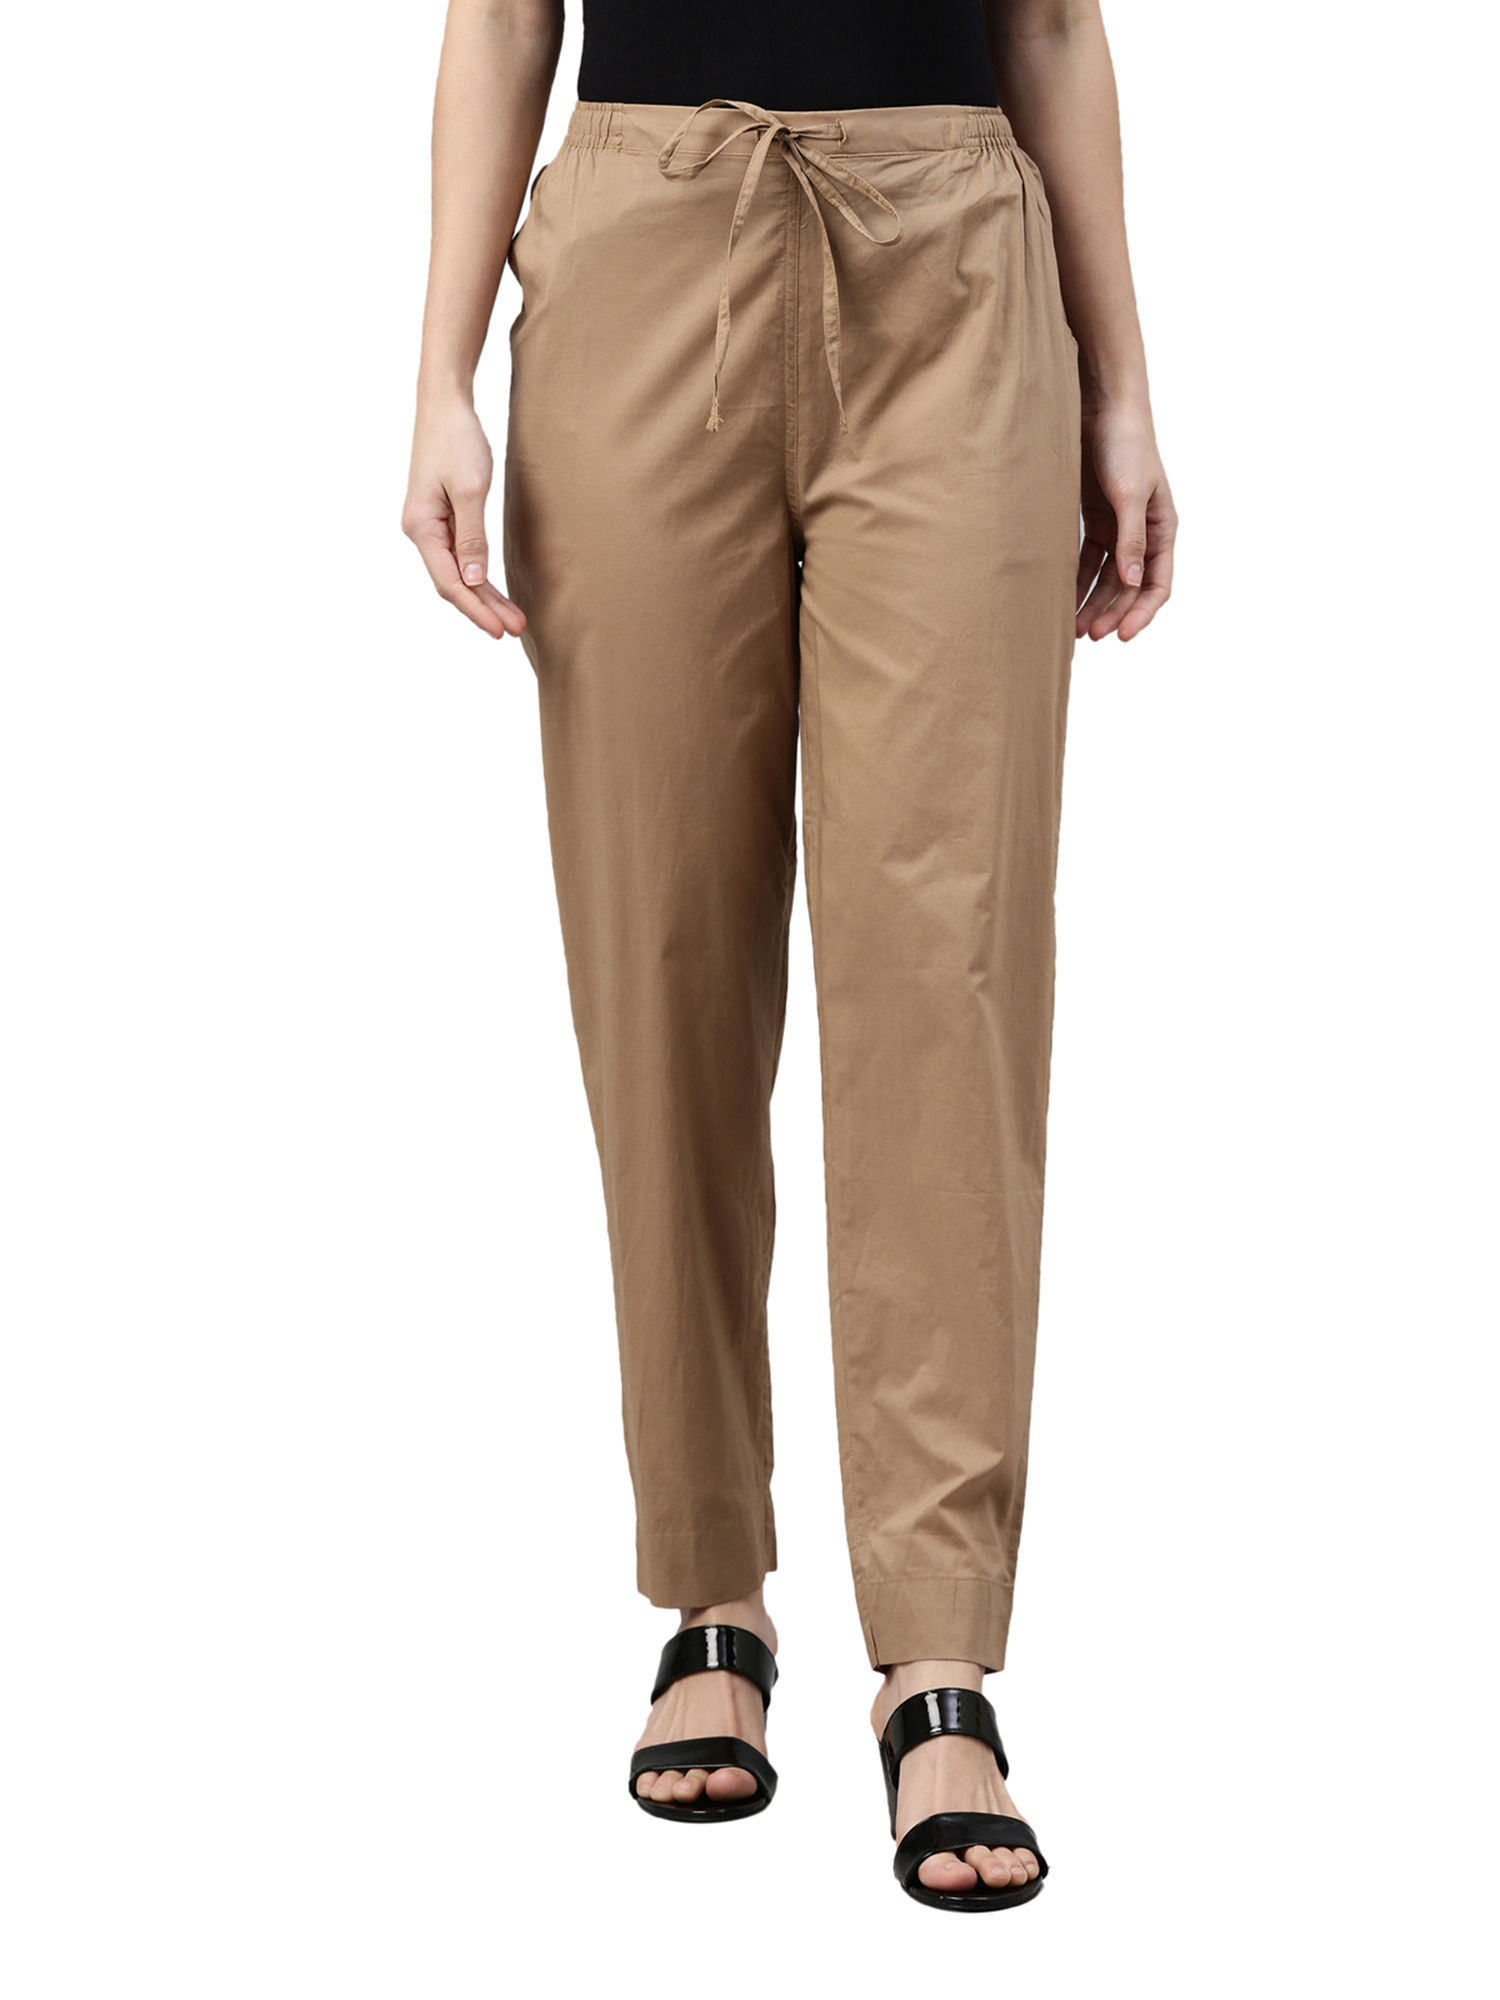 Cotton Pants for Women Loose Fit Business Casual India  Ubuy